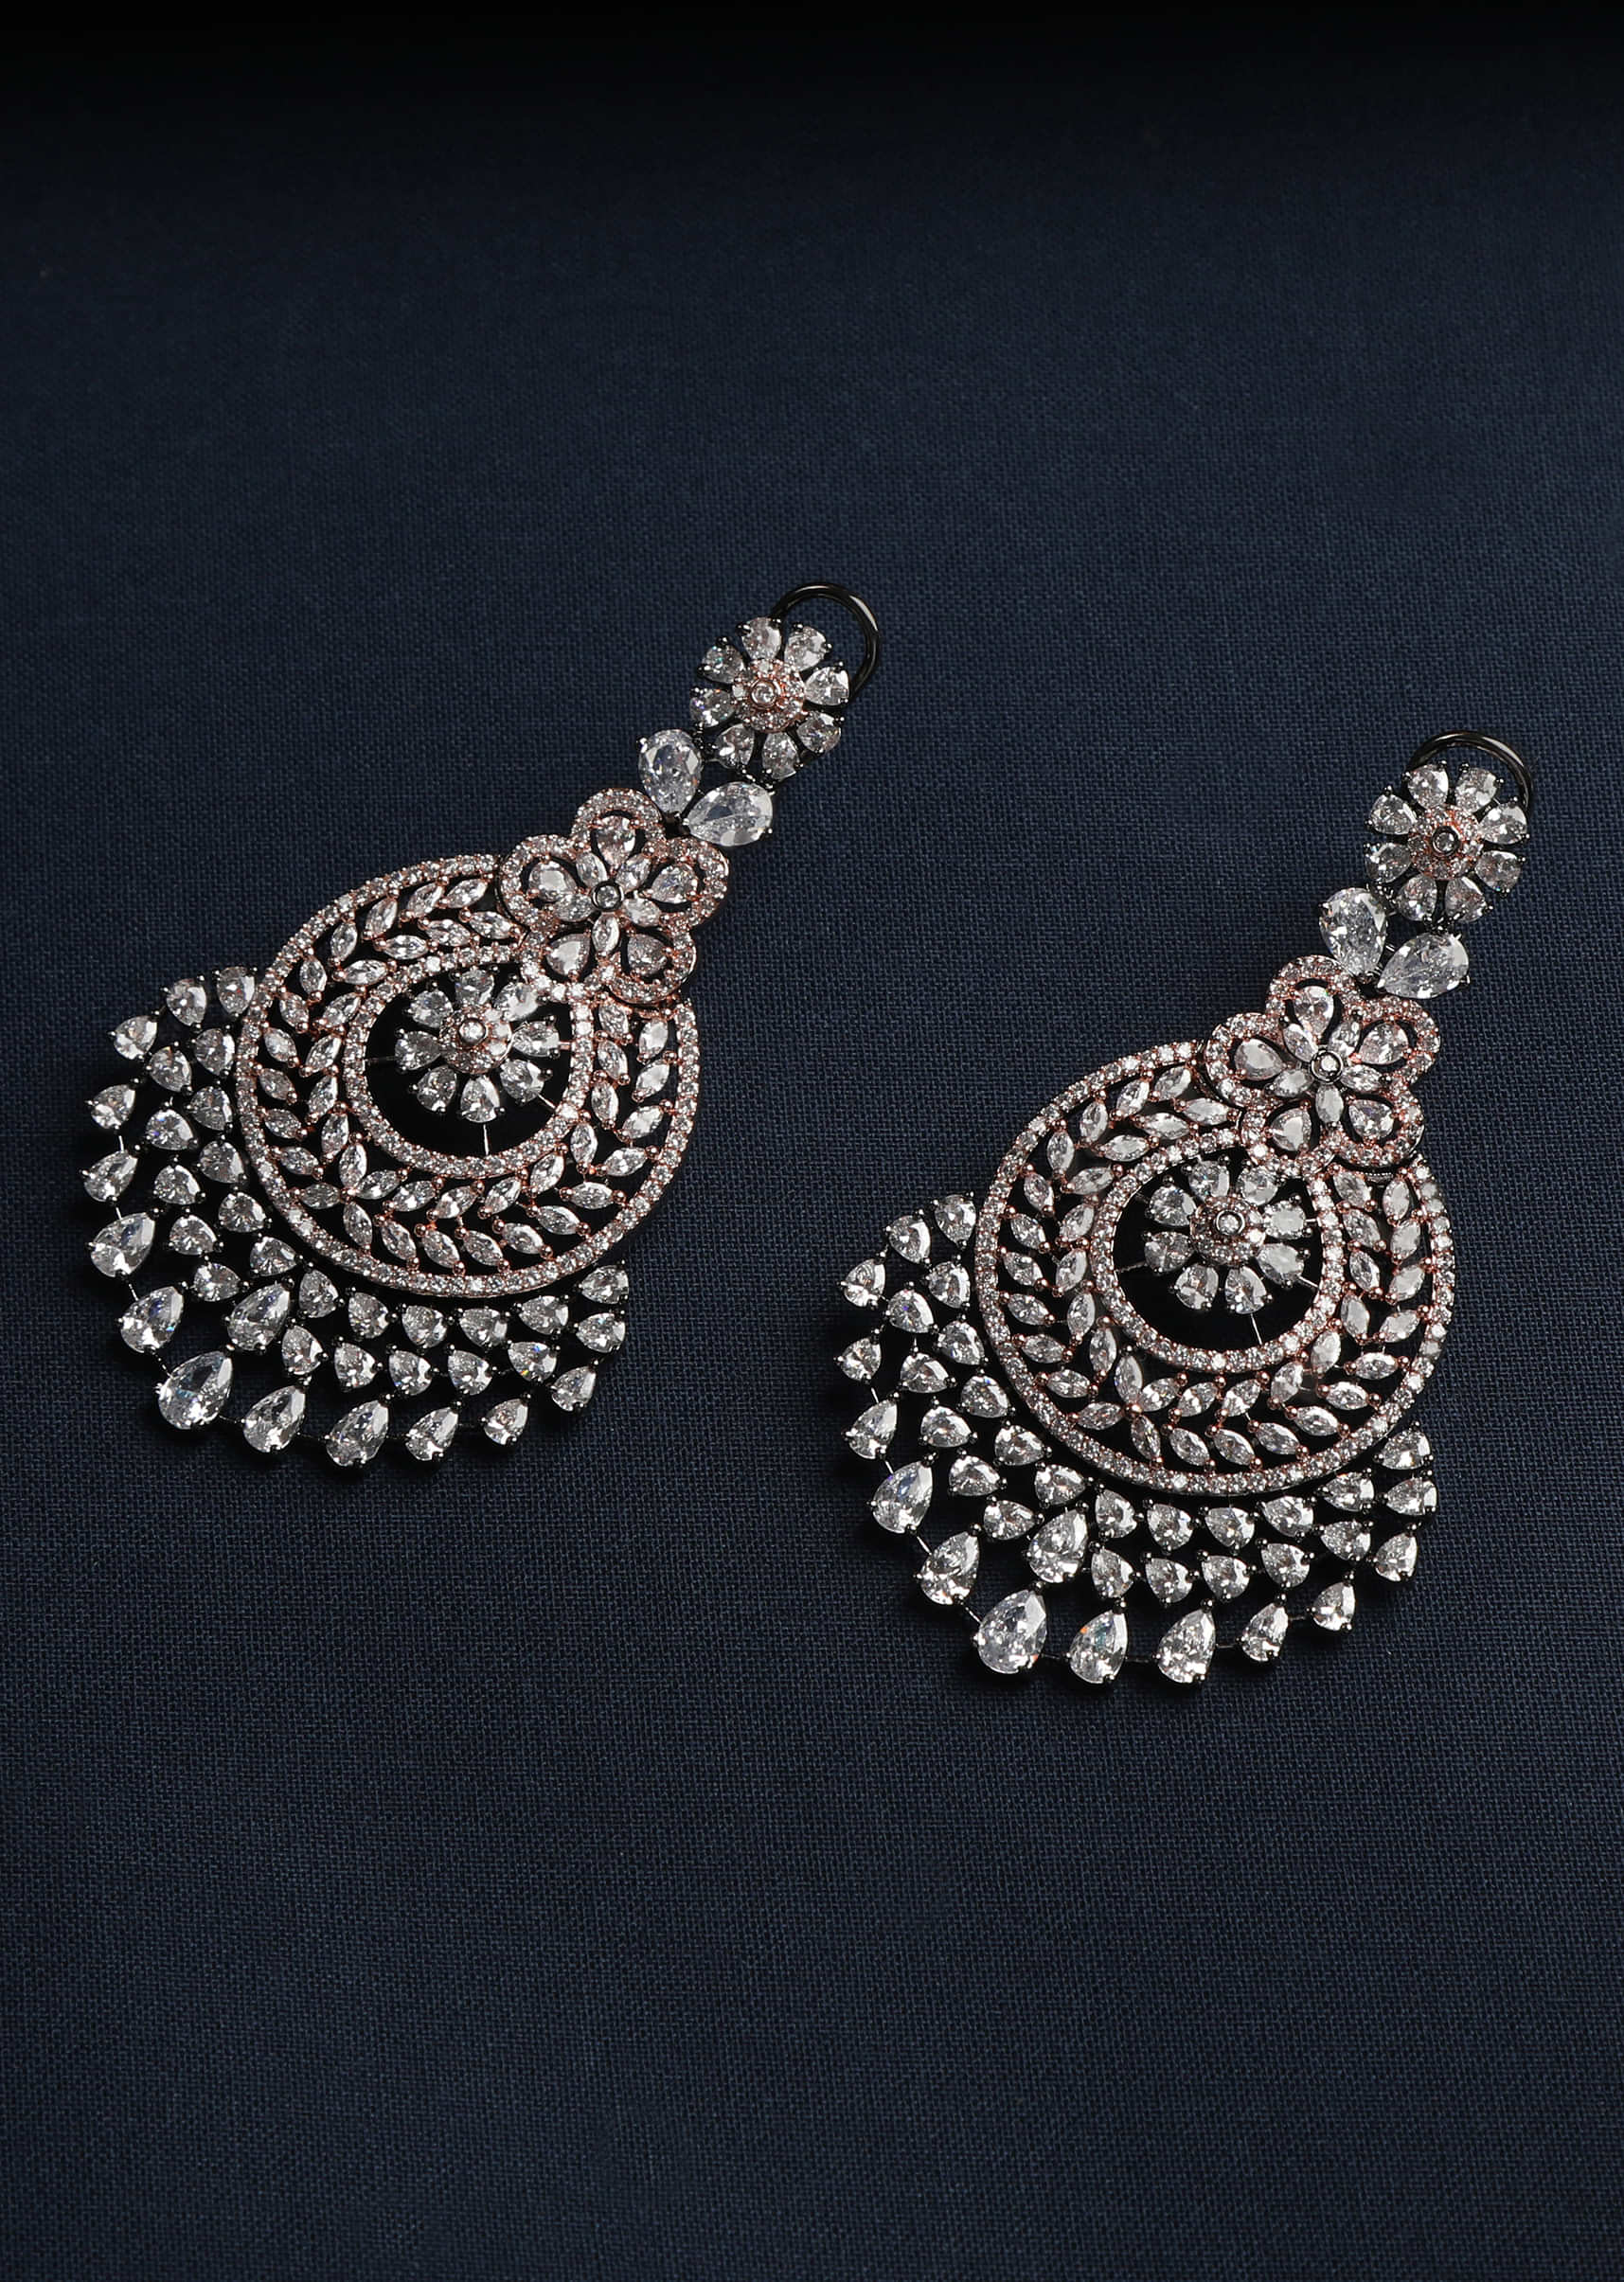 Rose Gold And Black Antique Finish Chandelier Earrings Studded With Faux Diamonds By Tizora